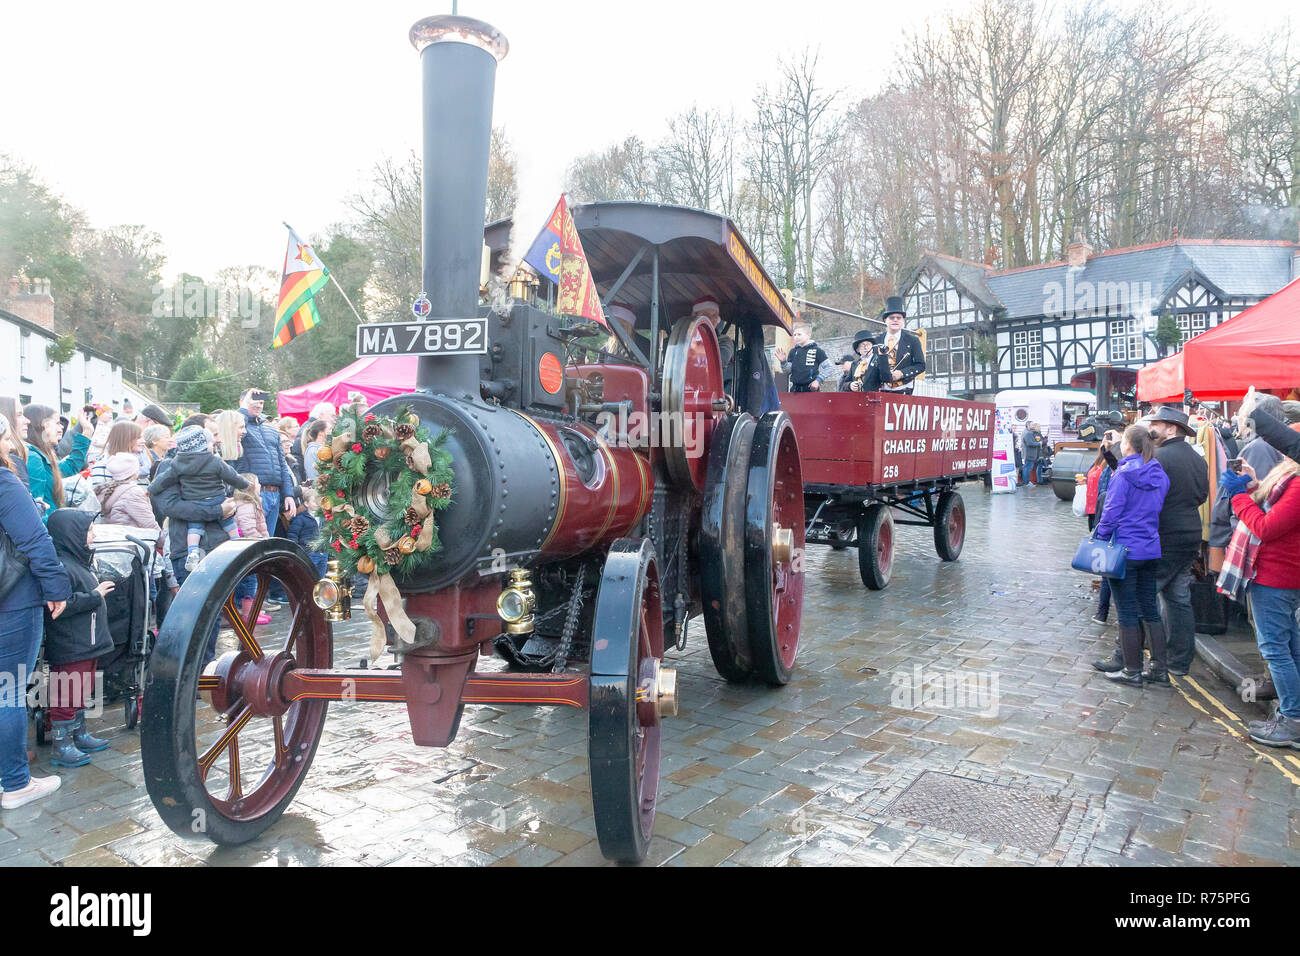 Lymm, Cheshire, UK. 8th December 2018. The annual Lymm Dickensian Festival took place in Lymm, Cheshire, England, UK. The event has taken place for over a quarter of a century in Lymm Village. Every year the Lymm community comes together with the support of the Lymm Parish Council to take the village back in time to a different era, when Dickens was alive, and where you might see Ebenezer Scrooge strolling through the streets. Credit: John Hopkins/Alamy Live News Stock Photo